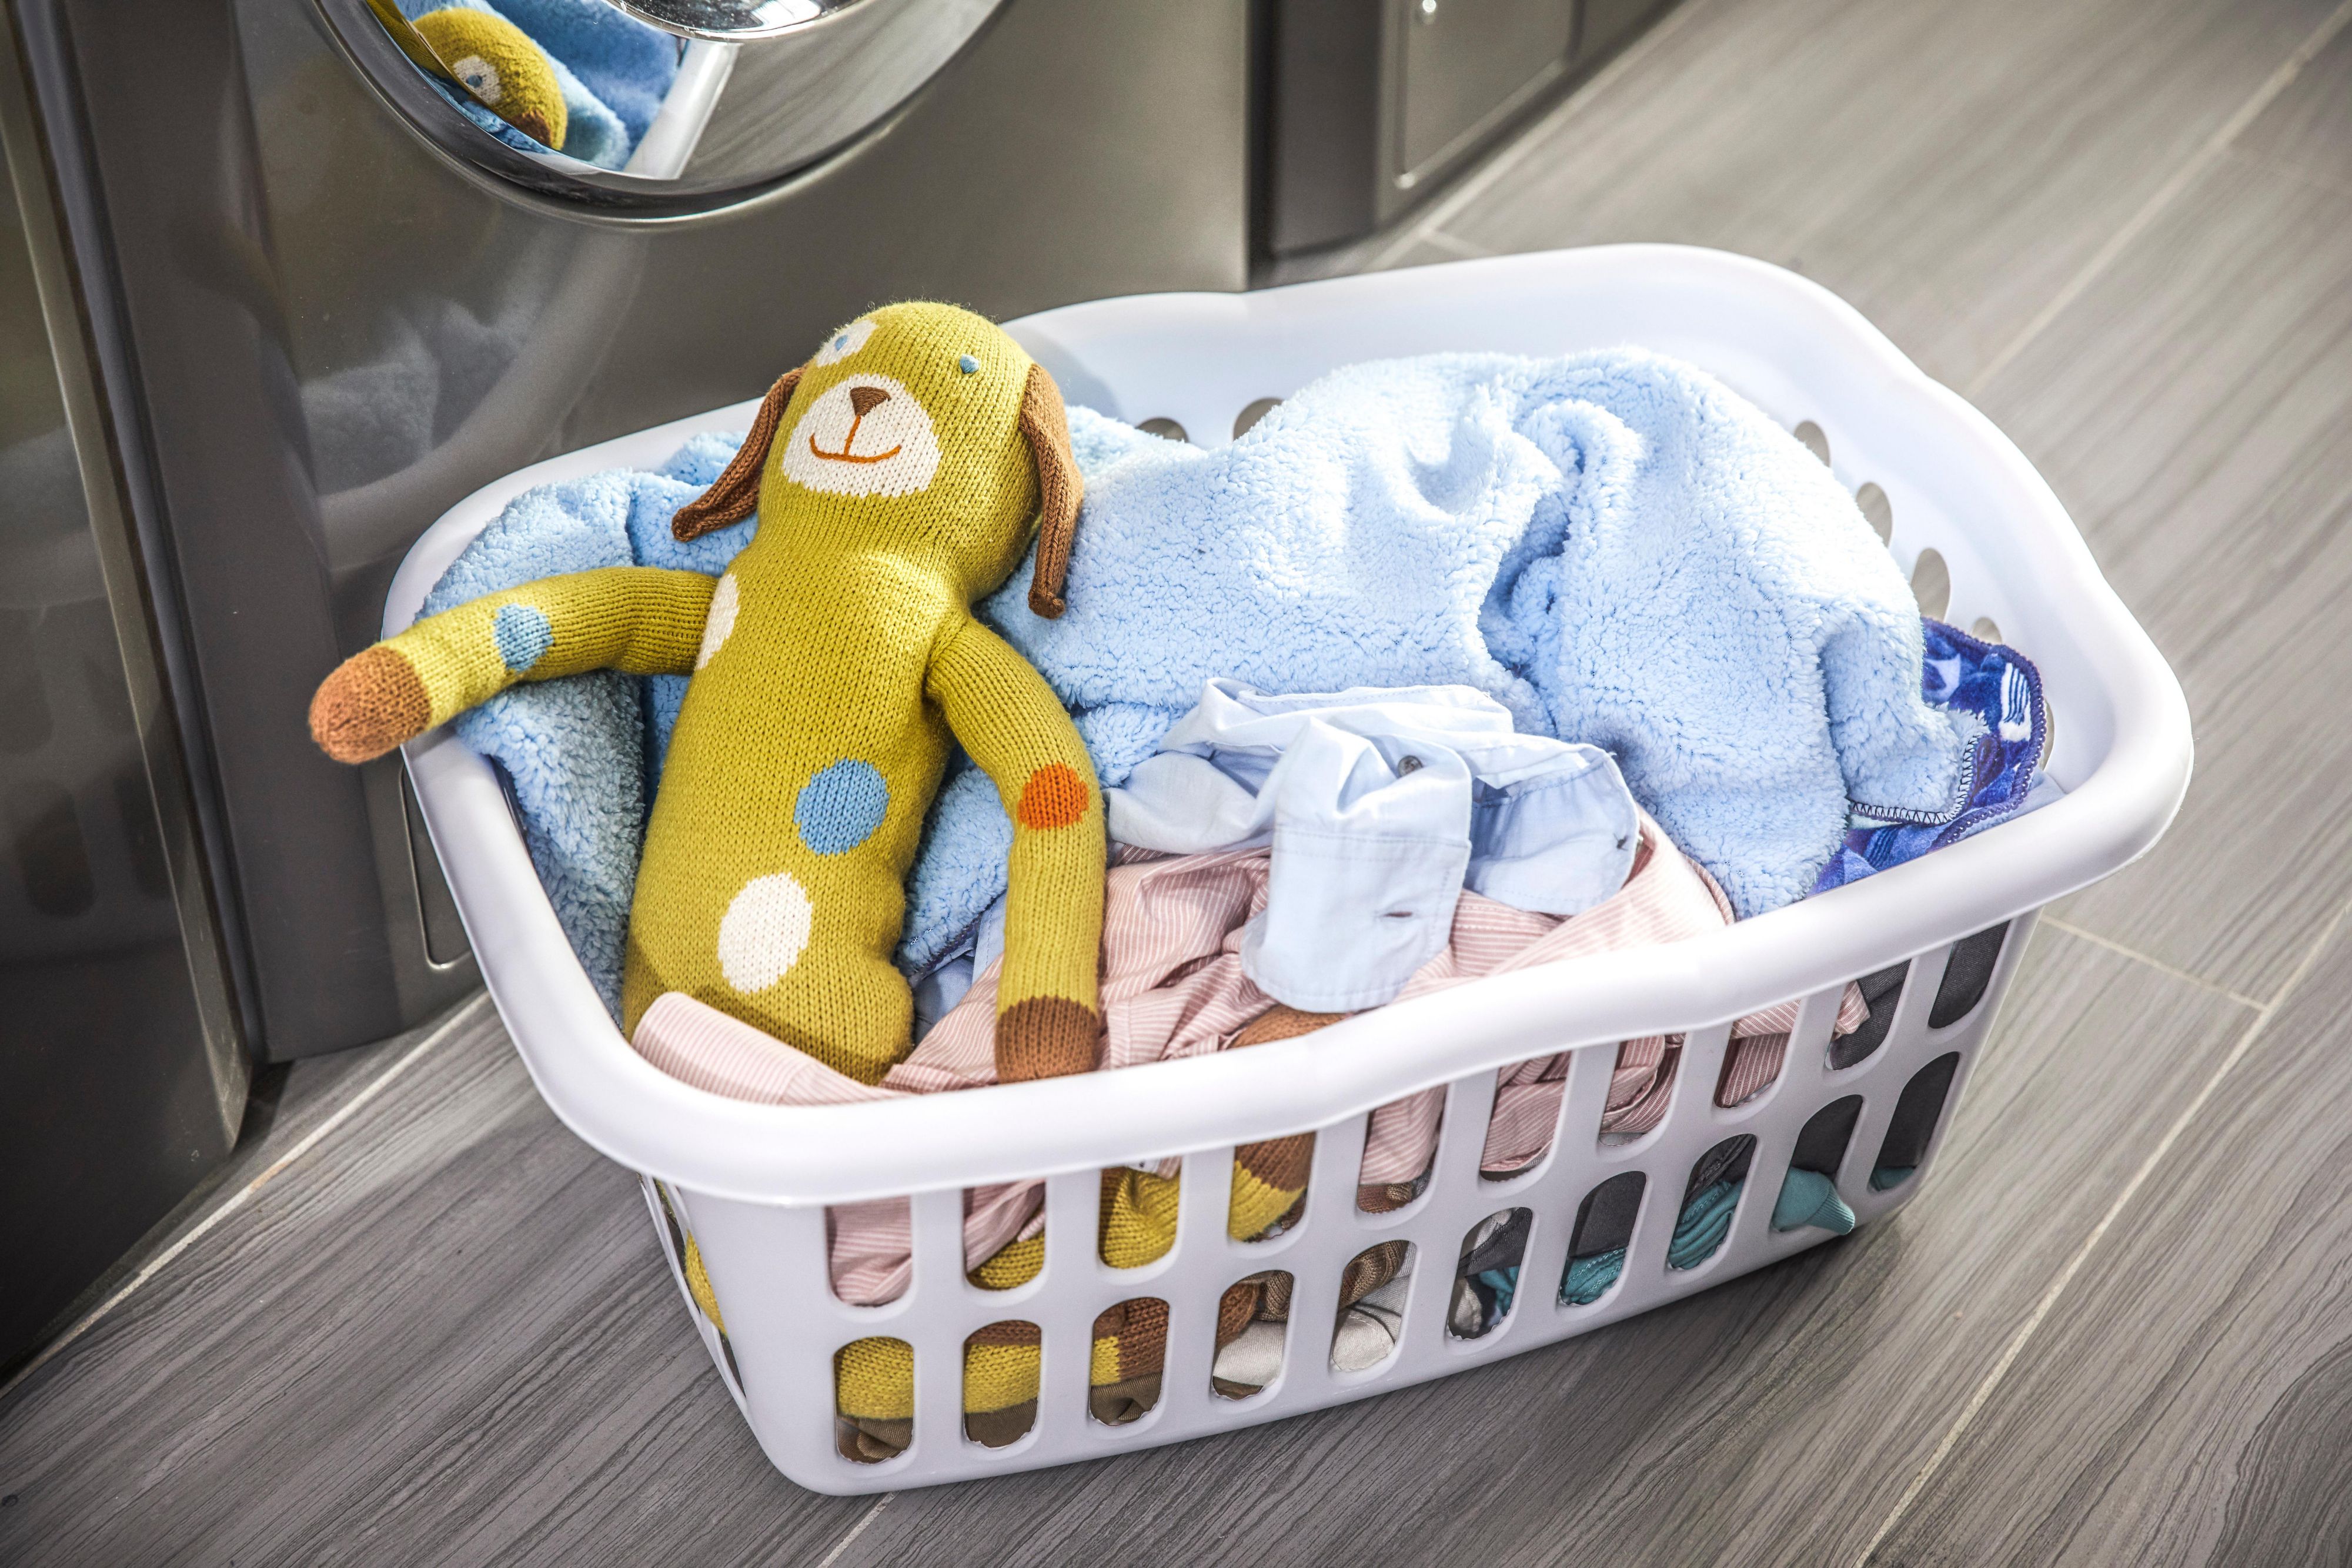 24/7 free on-site guest self–laundry facility. We offer dry cleaning pickup/laundry same day services. Light cleaning daily with full-service cleaning weekly or upon request.